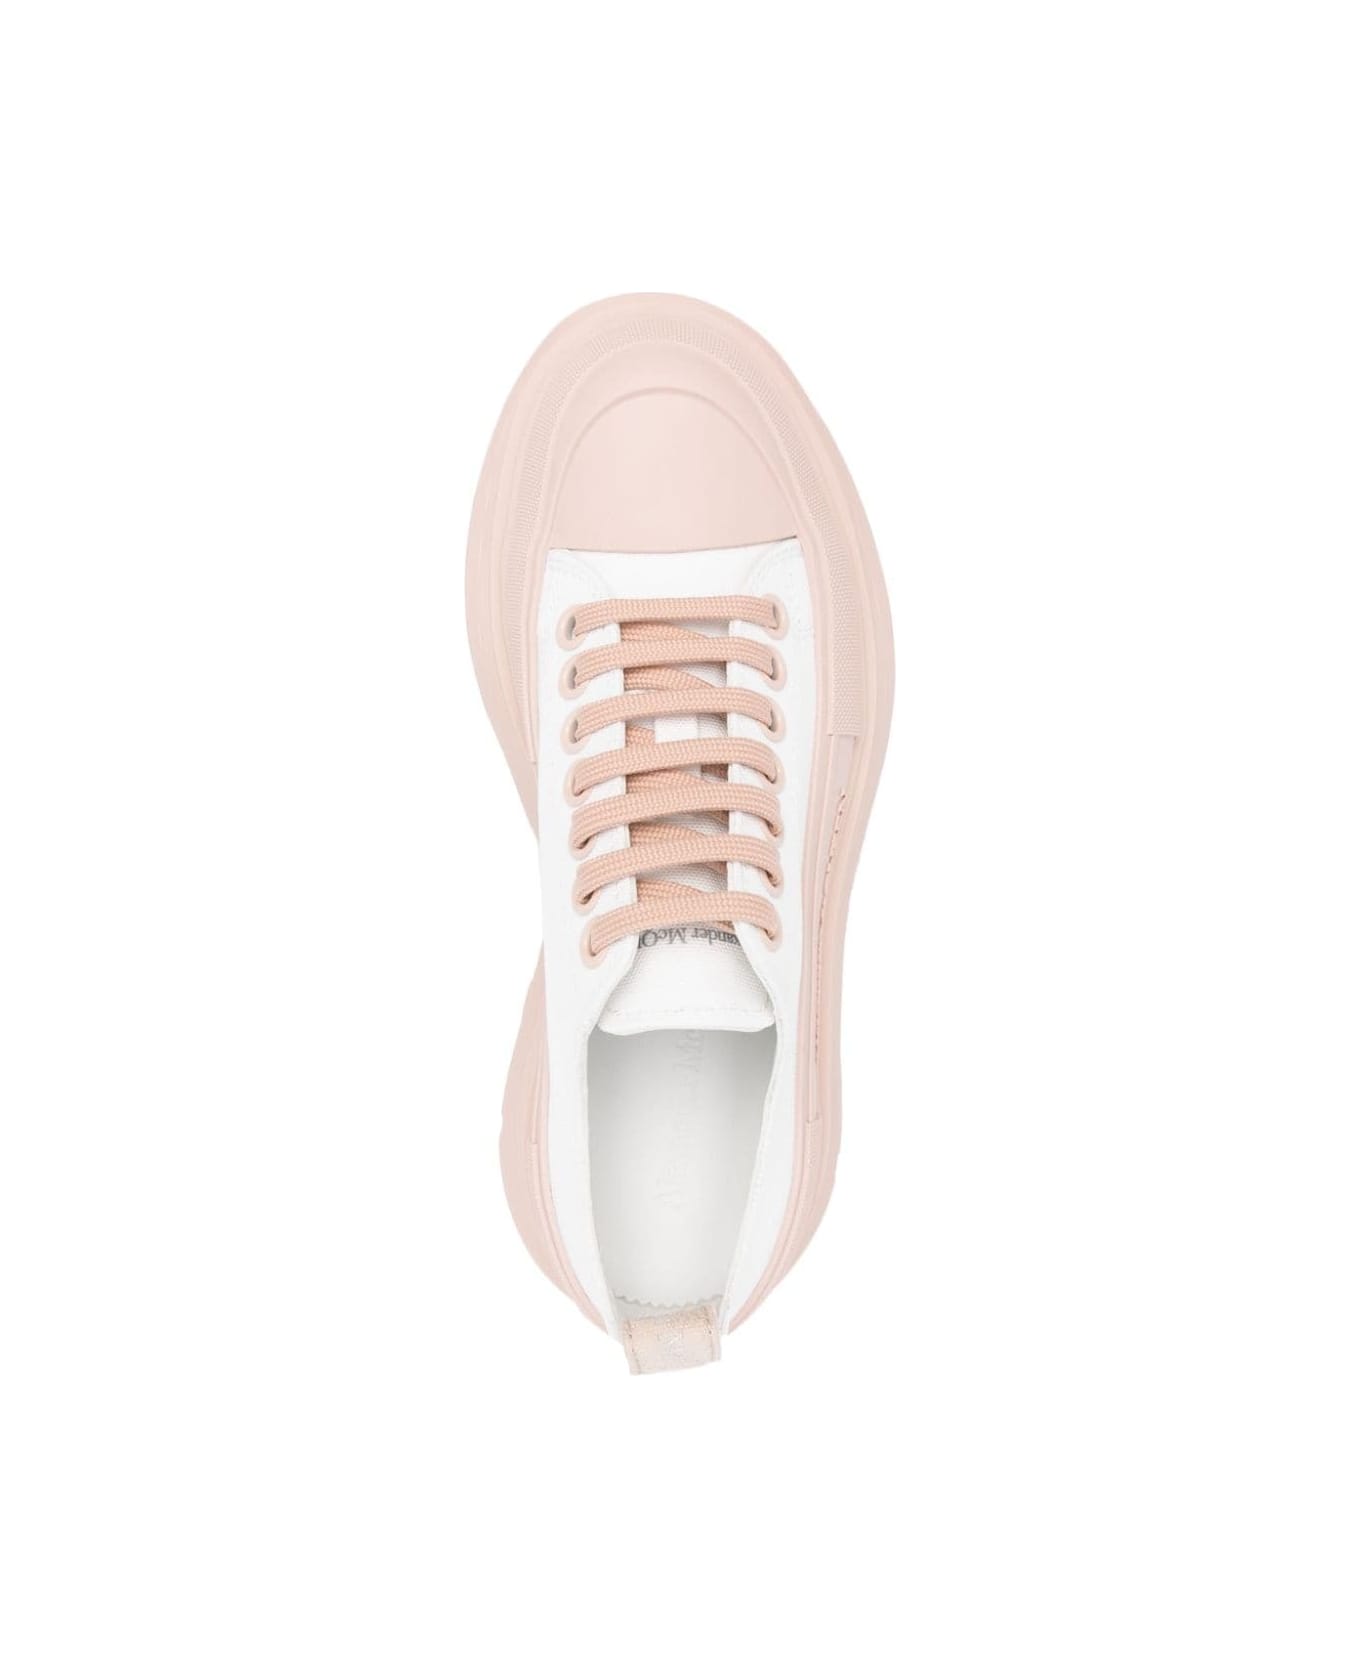 Alexander McQueen White And Pink Tread Slick Sneakers - Pink